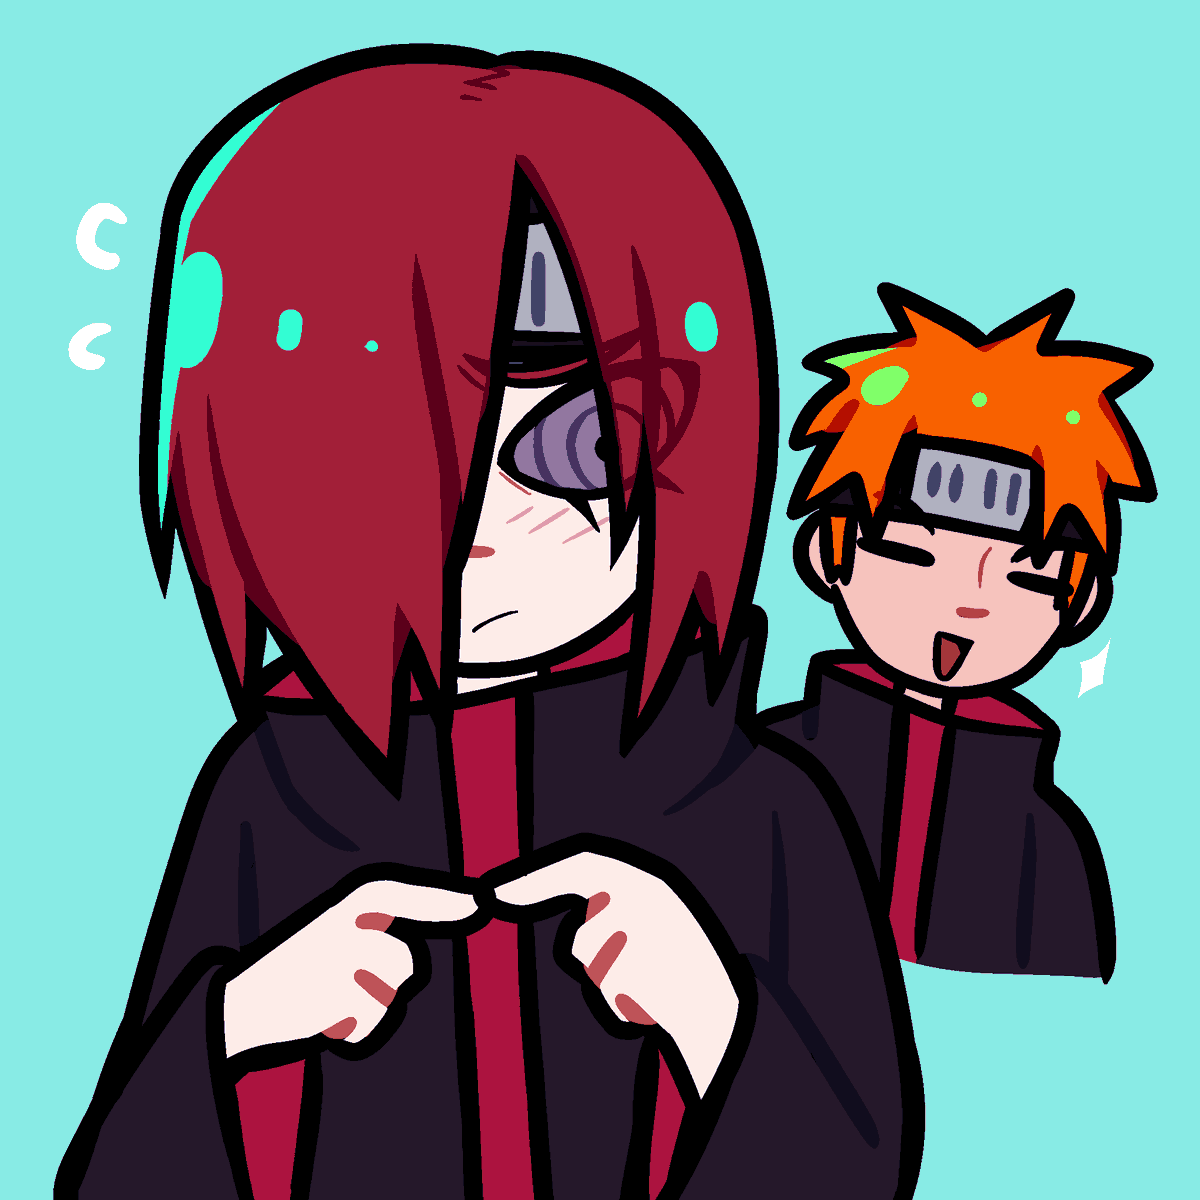 Nagato is such a cutie patootie he’s so underrated (and Yahiko exists ig)
#NARUTO #NarutoShippuden #narutofanart